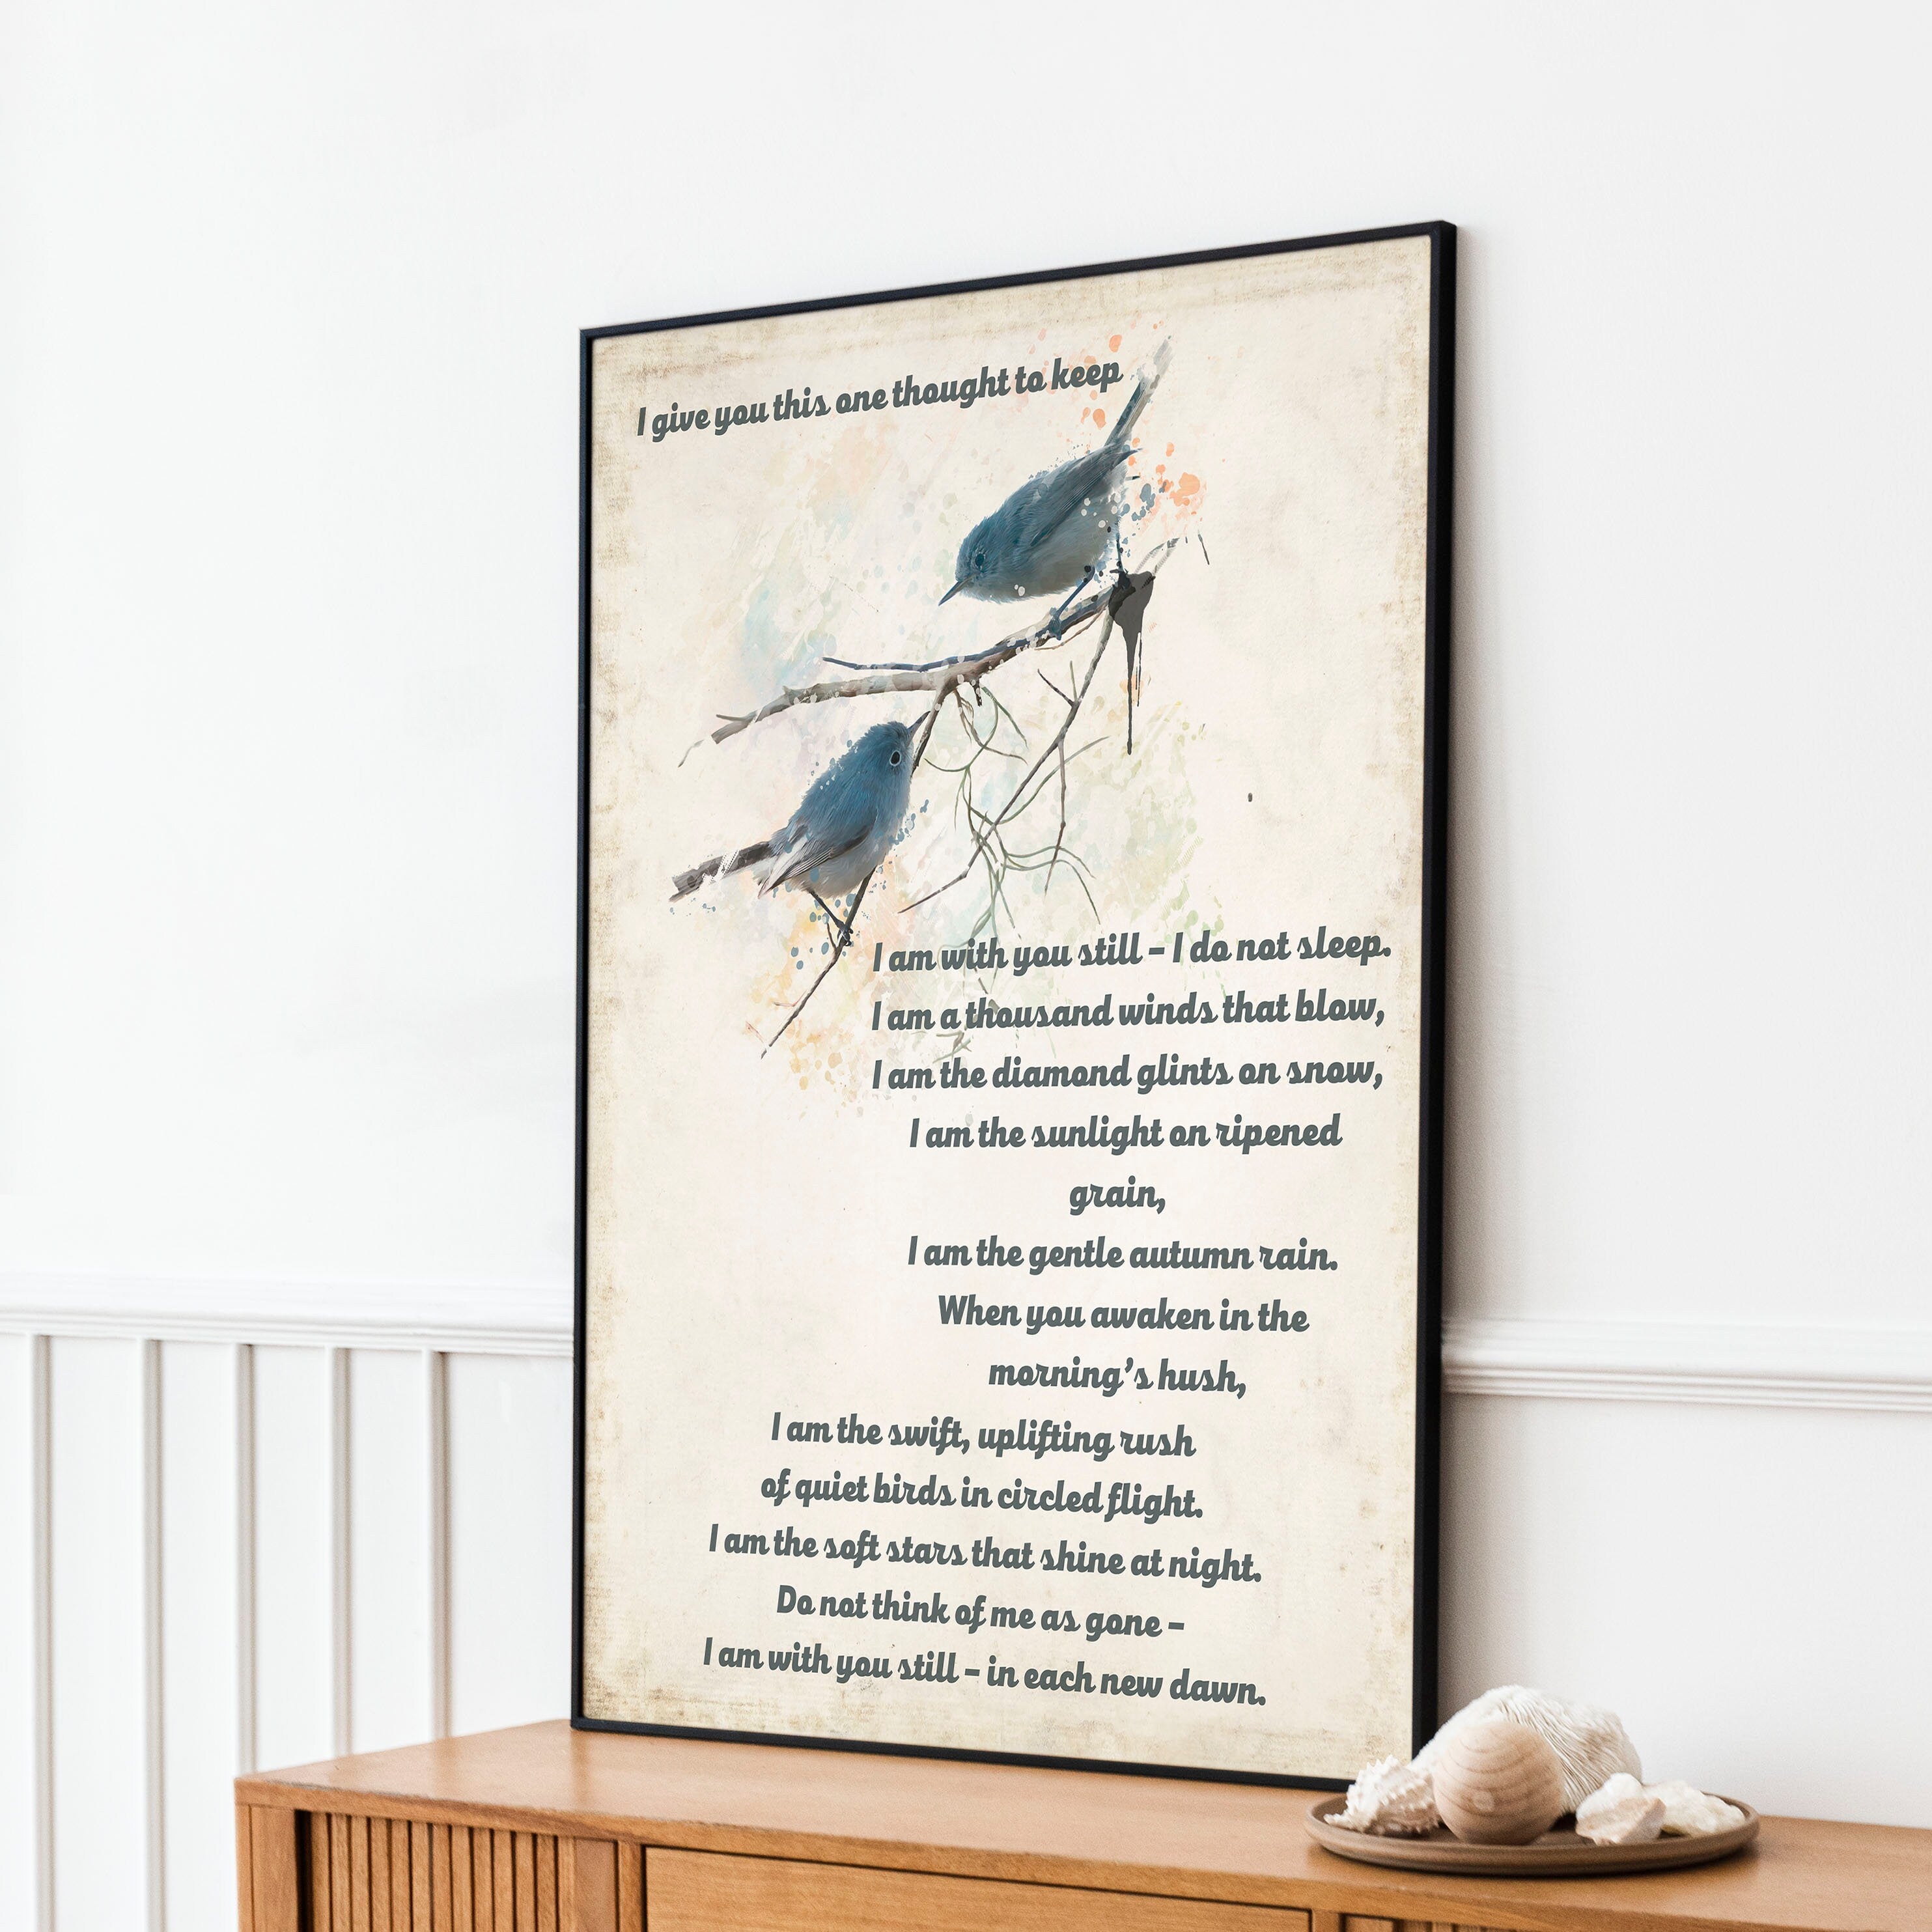 I Give You This One Thought To Keep Native American Prayer Quote Print With Watercolor Birds, Inspirational Gift Wall Art Print